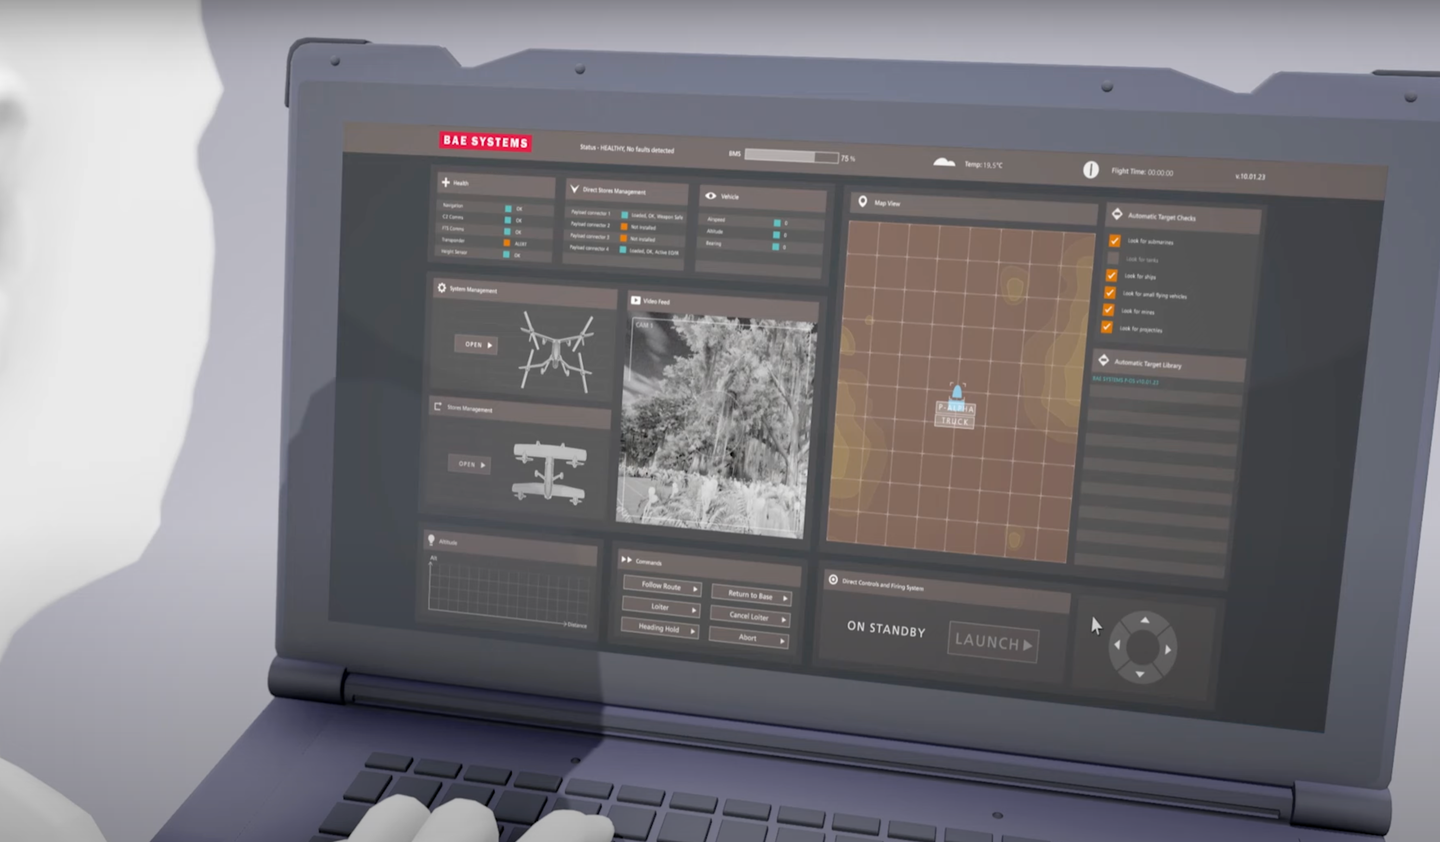 Screengrab from the BAE Australia video showing a rendering of the interface for STRIX's control station. <em>Credit: BAE Australia</em>